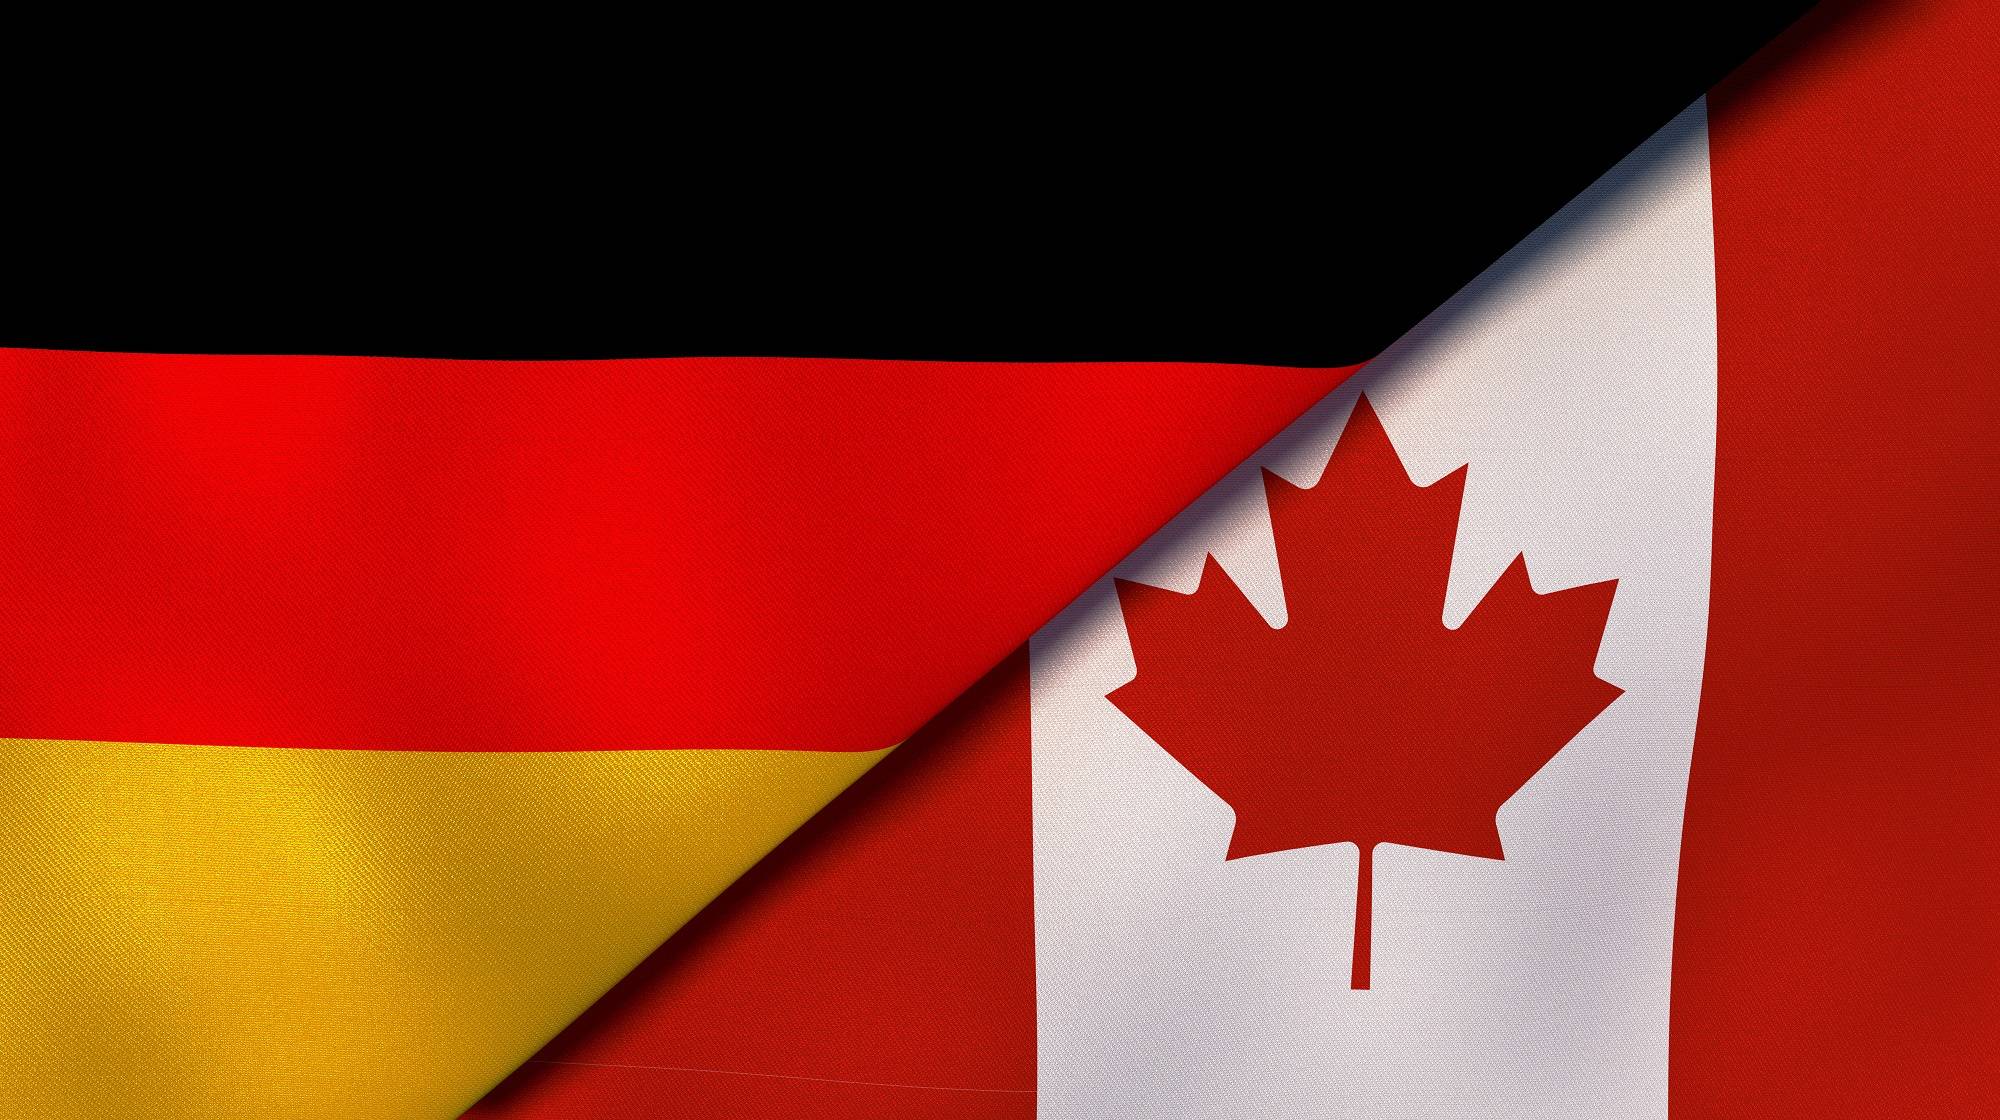 https://www.marinelink.com/news/germany-canada-discussing-cooperation-498949